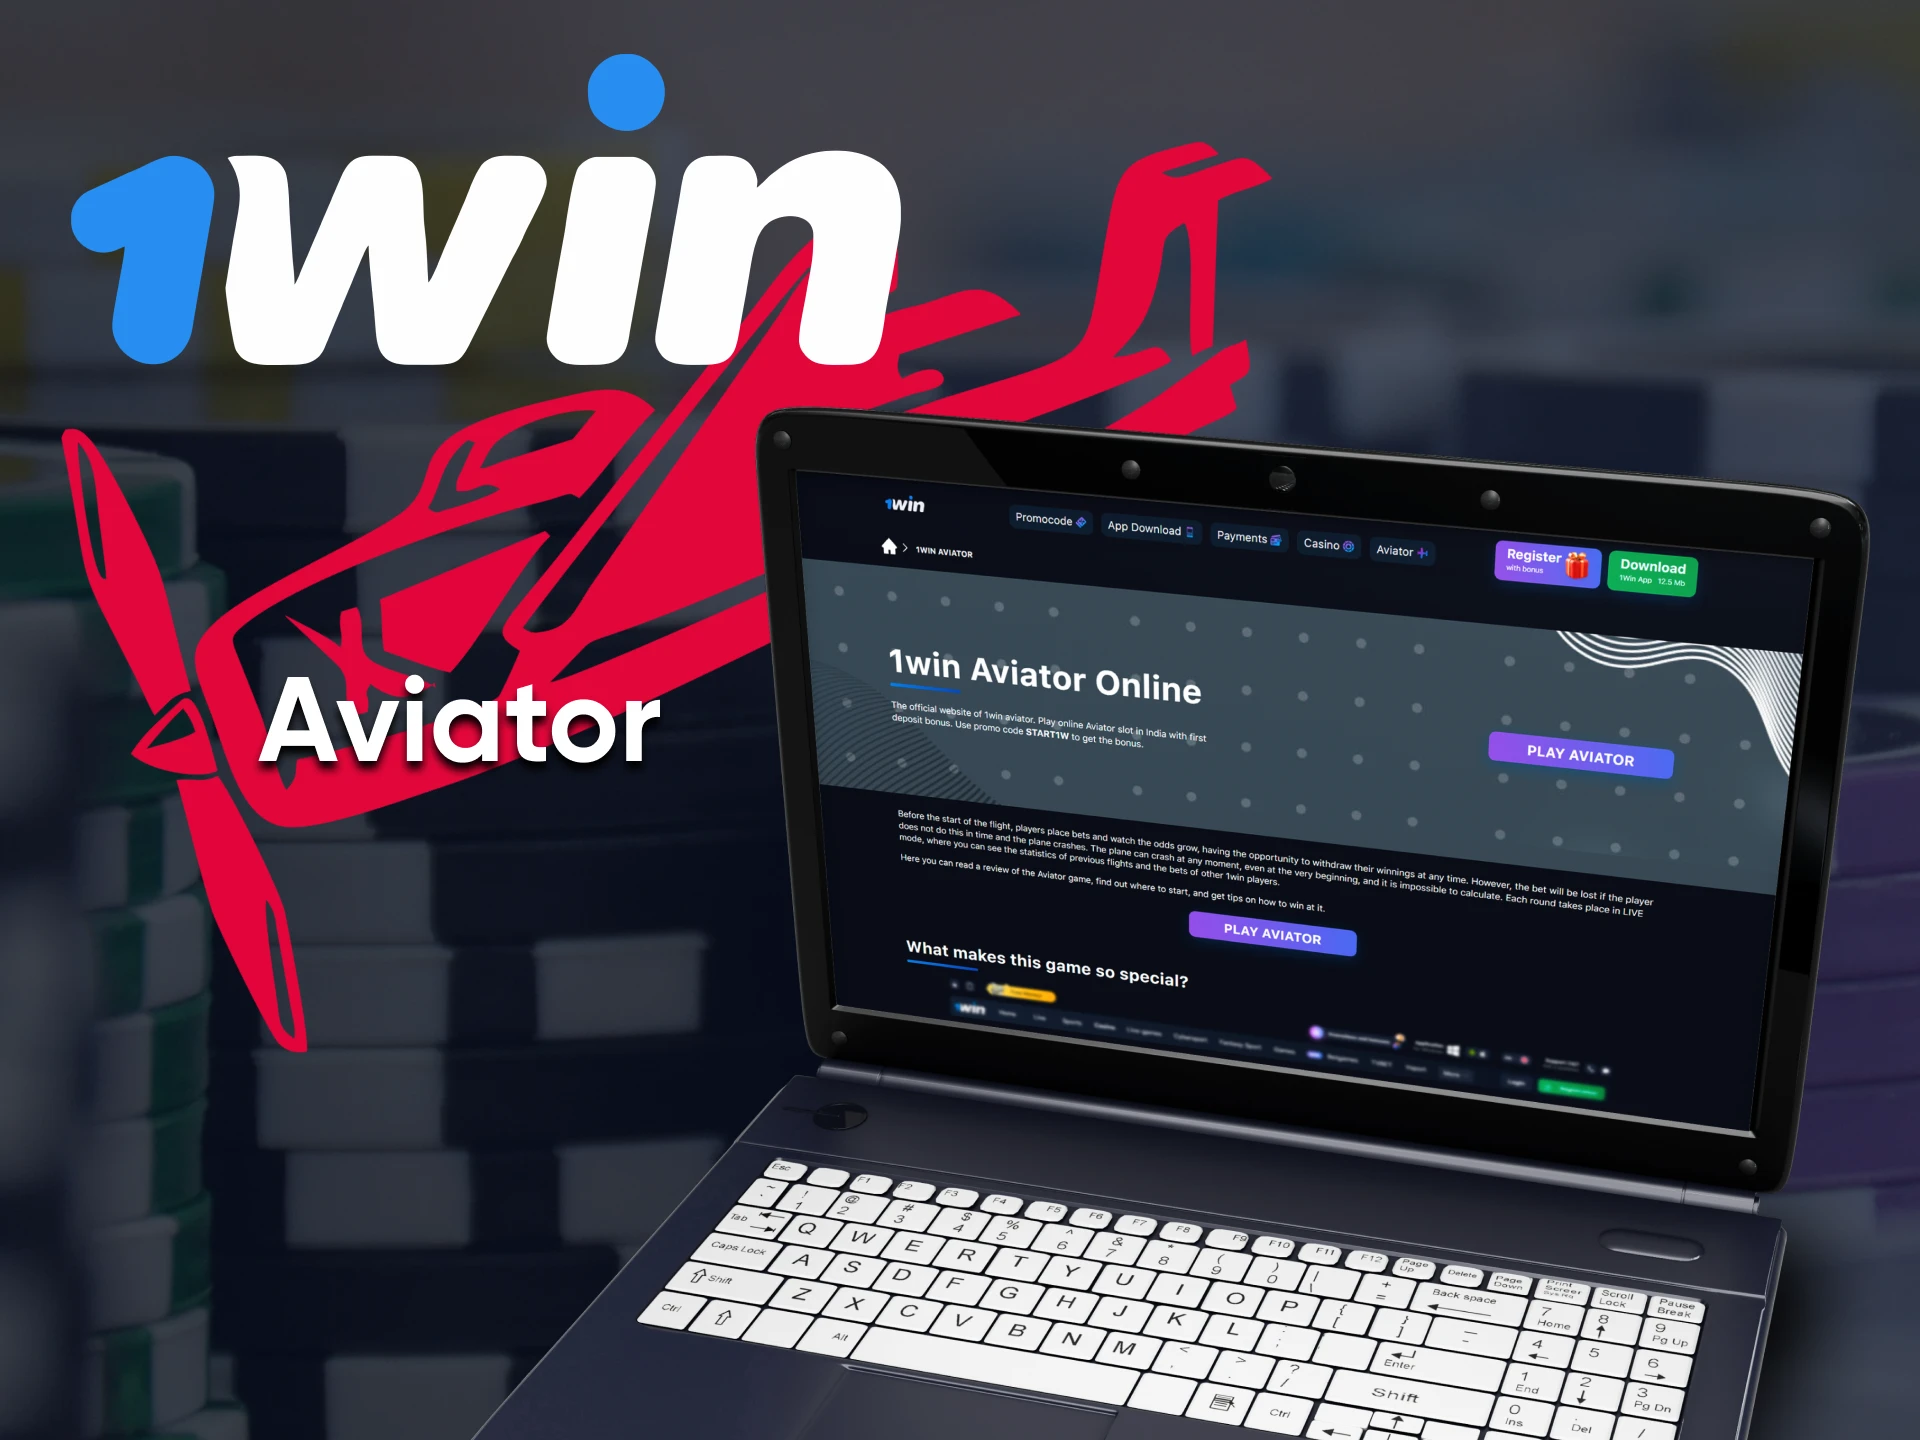 For games on 1win you can choose the Aviator game.